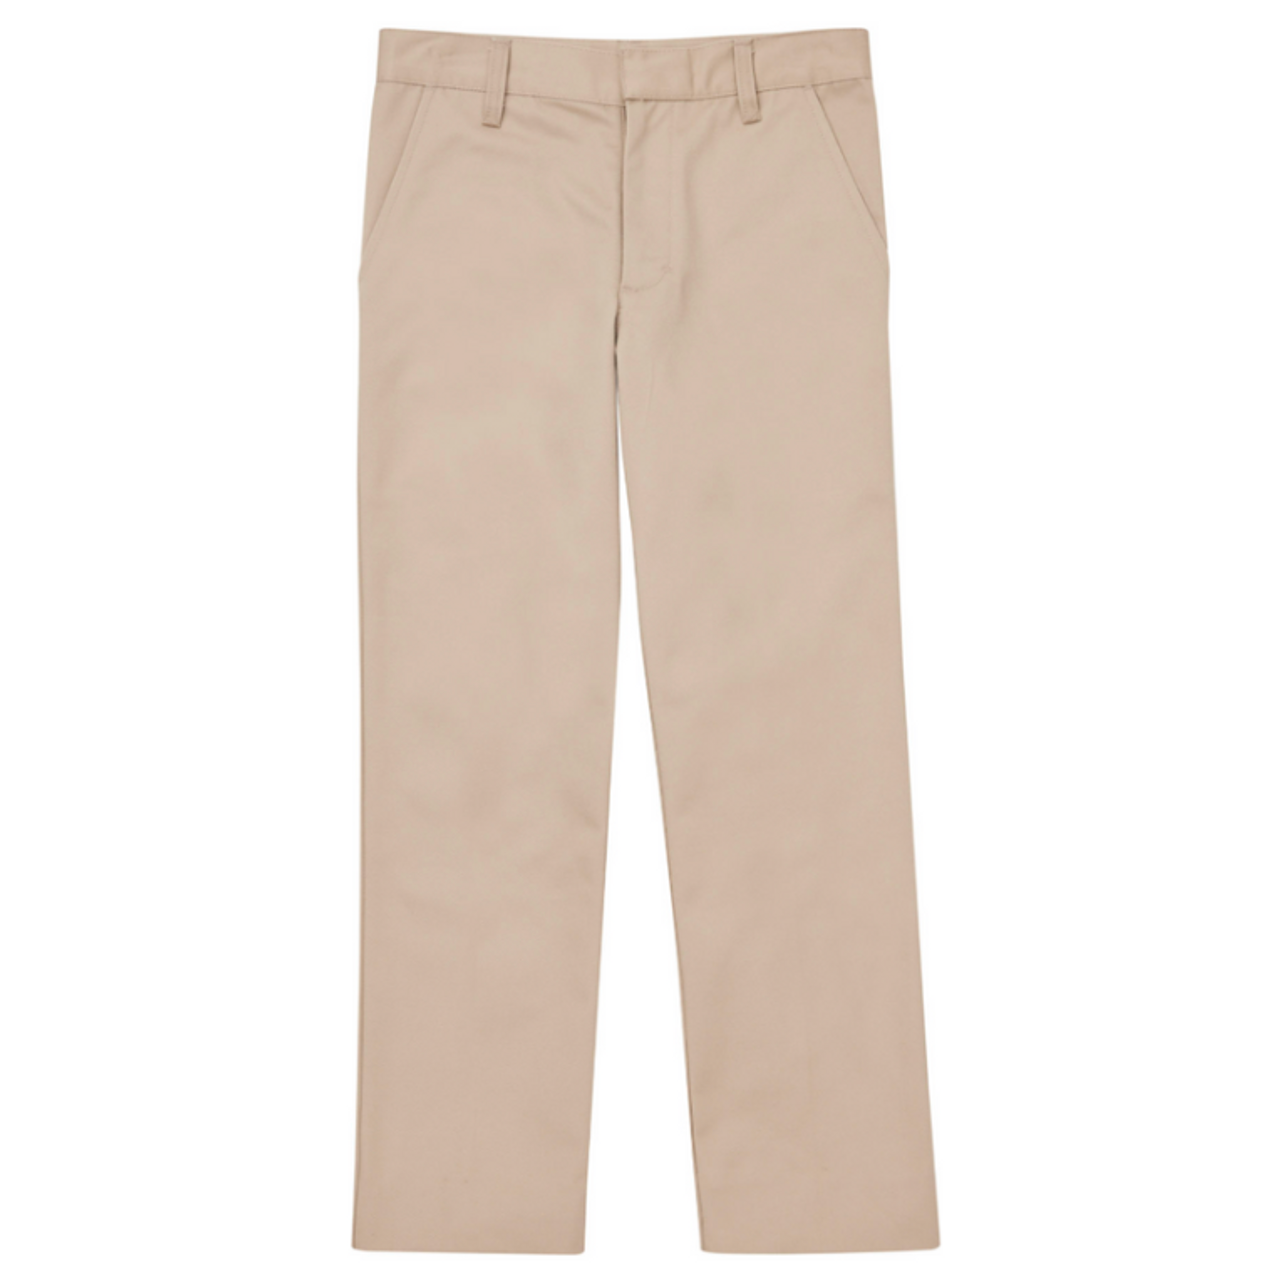 Boys Pant in Khaki - Educational Outfitters - Boise